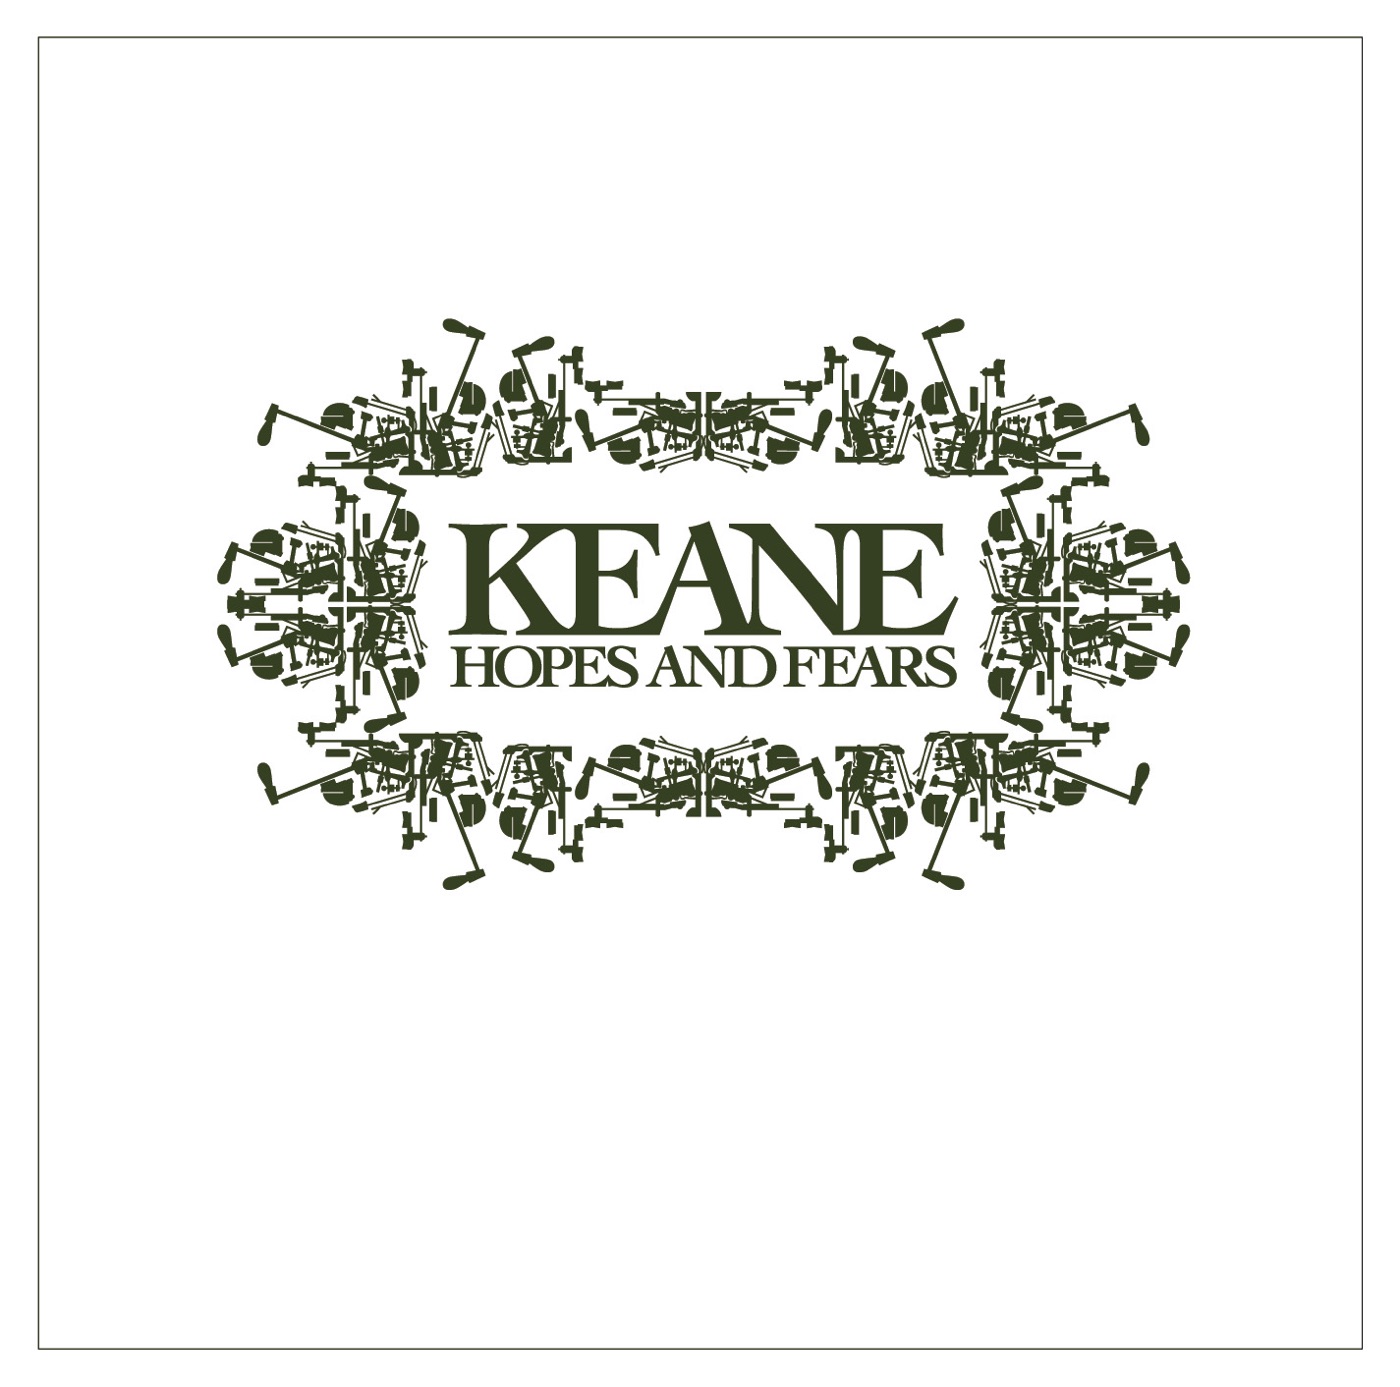 Hopes And Fears by Keane, Hopes and Fears